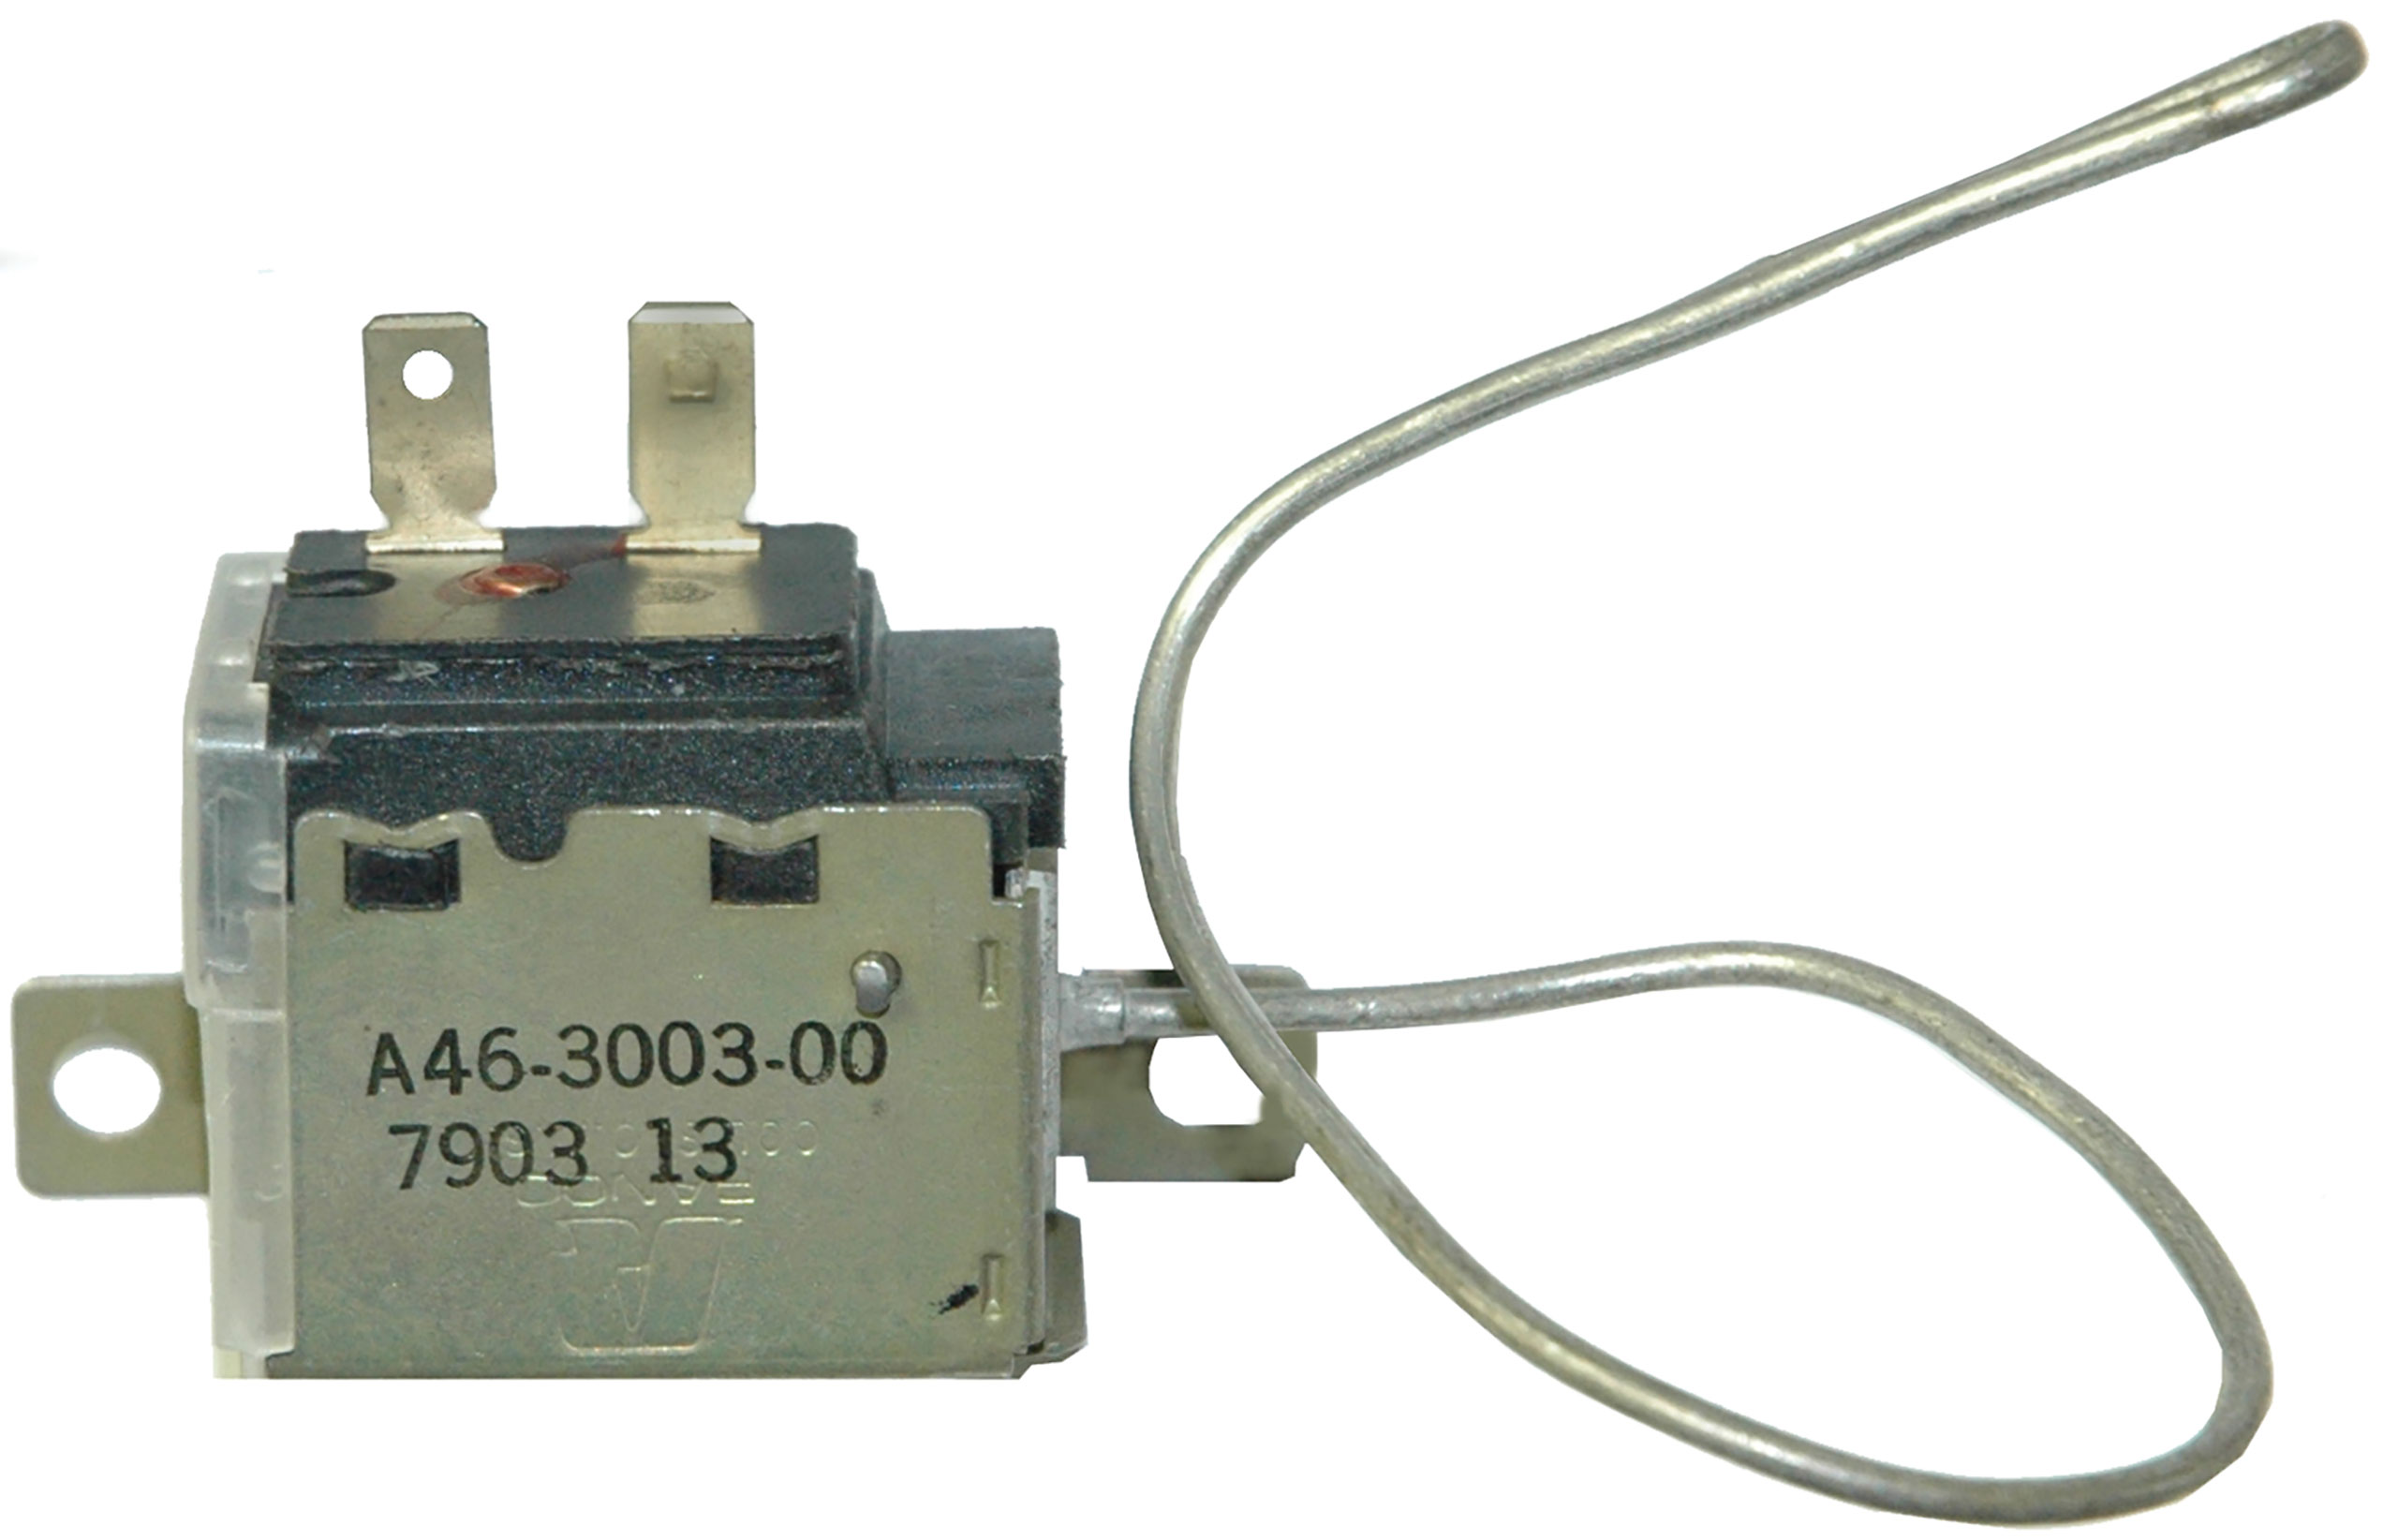 C3 1977-1979 Chevrolet Corvette Air Conditioning Thermostatic Switch - Replacement - Lectric Limited, Inc.